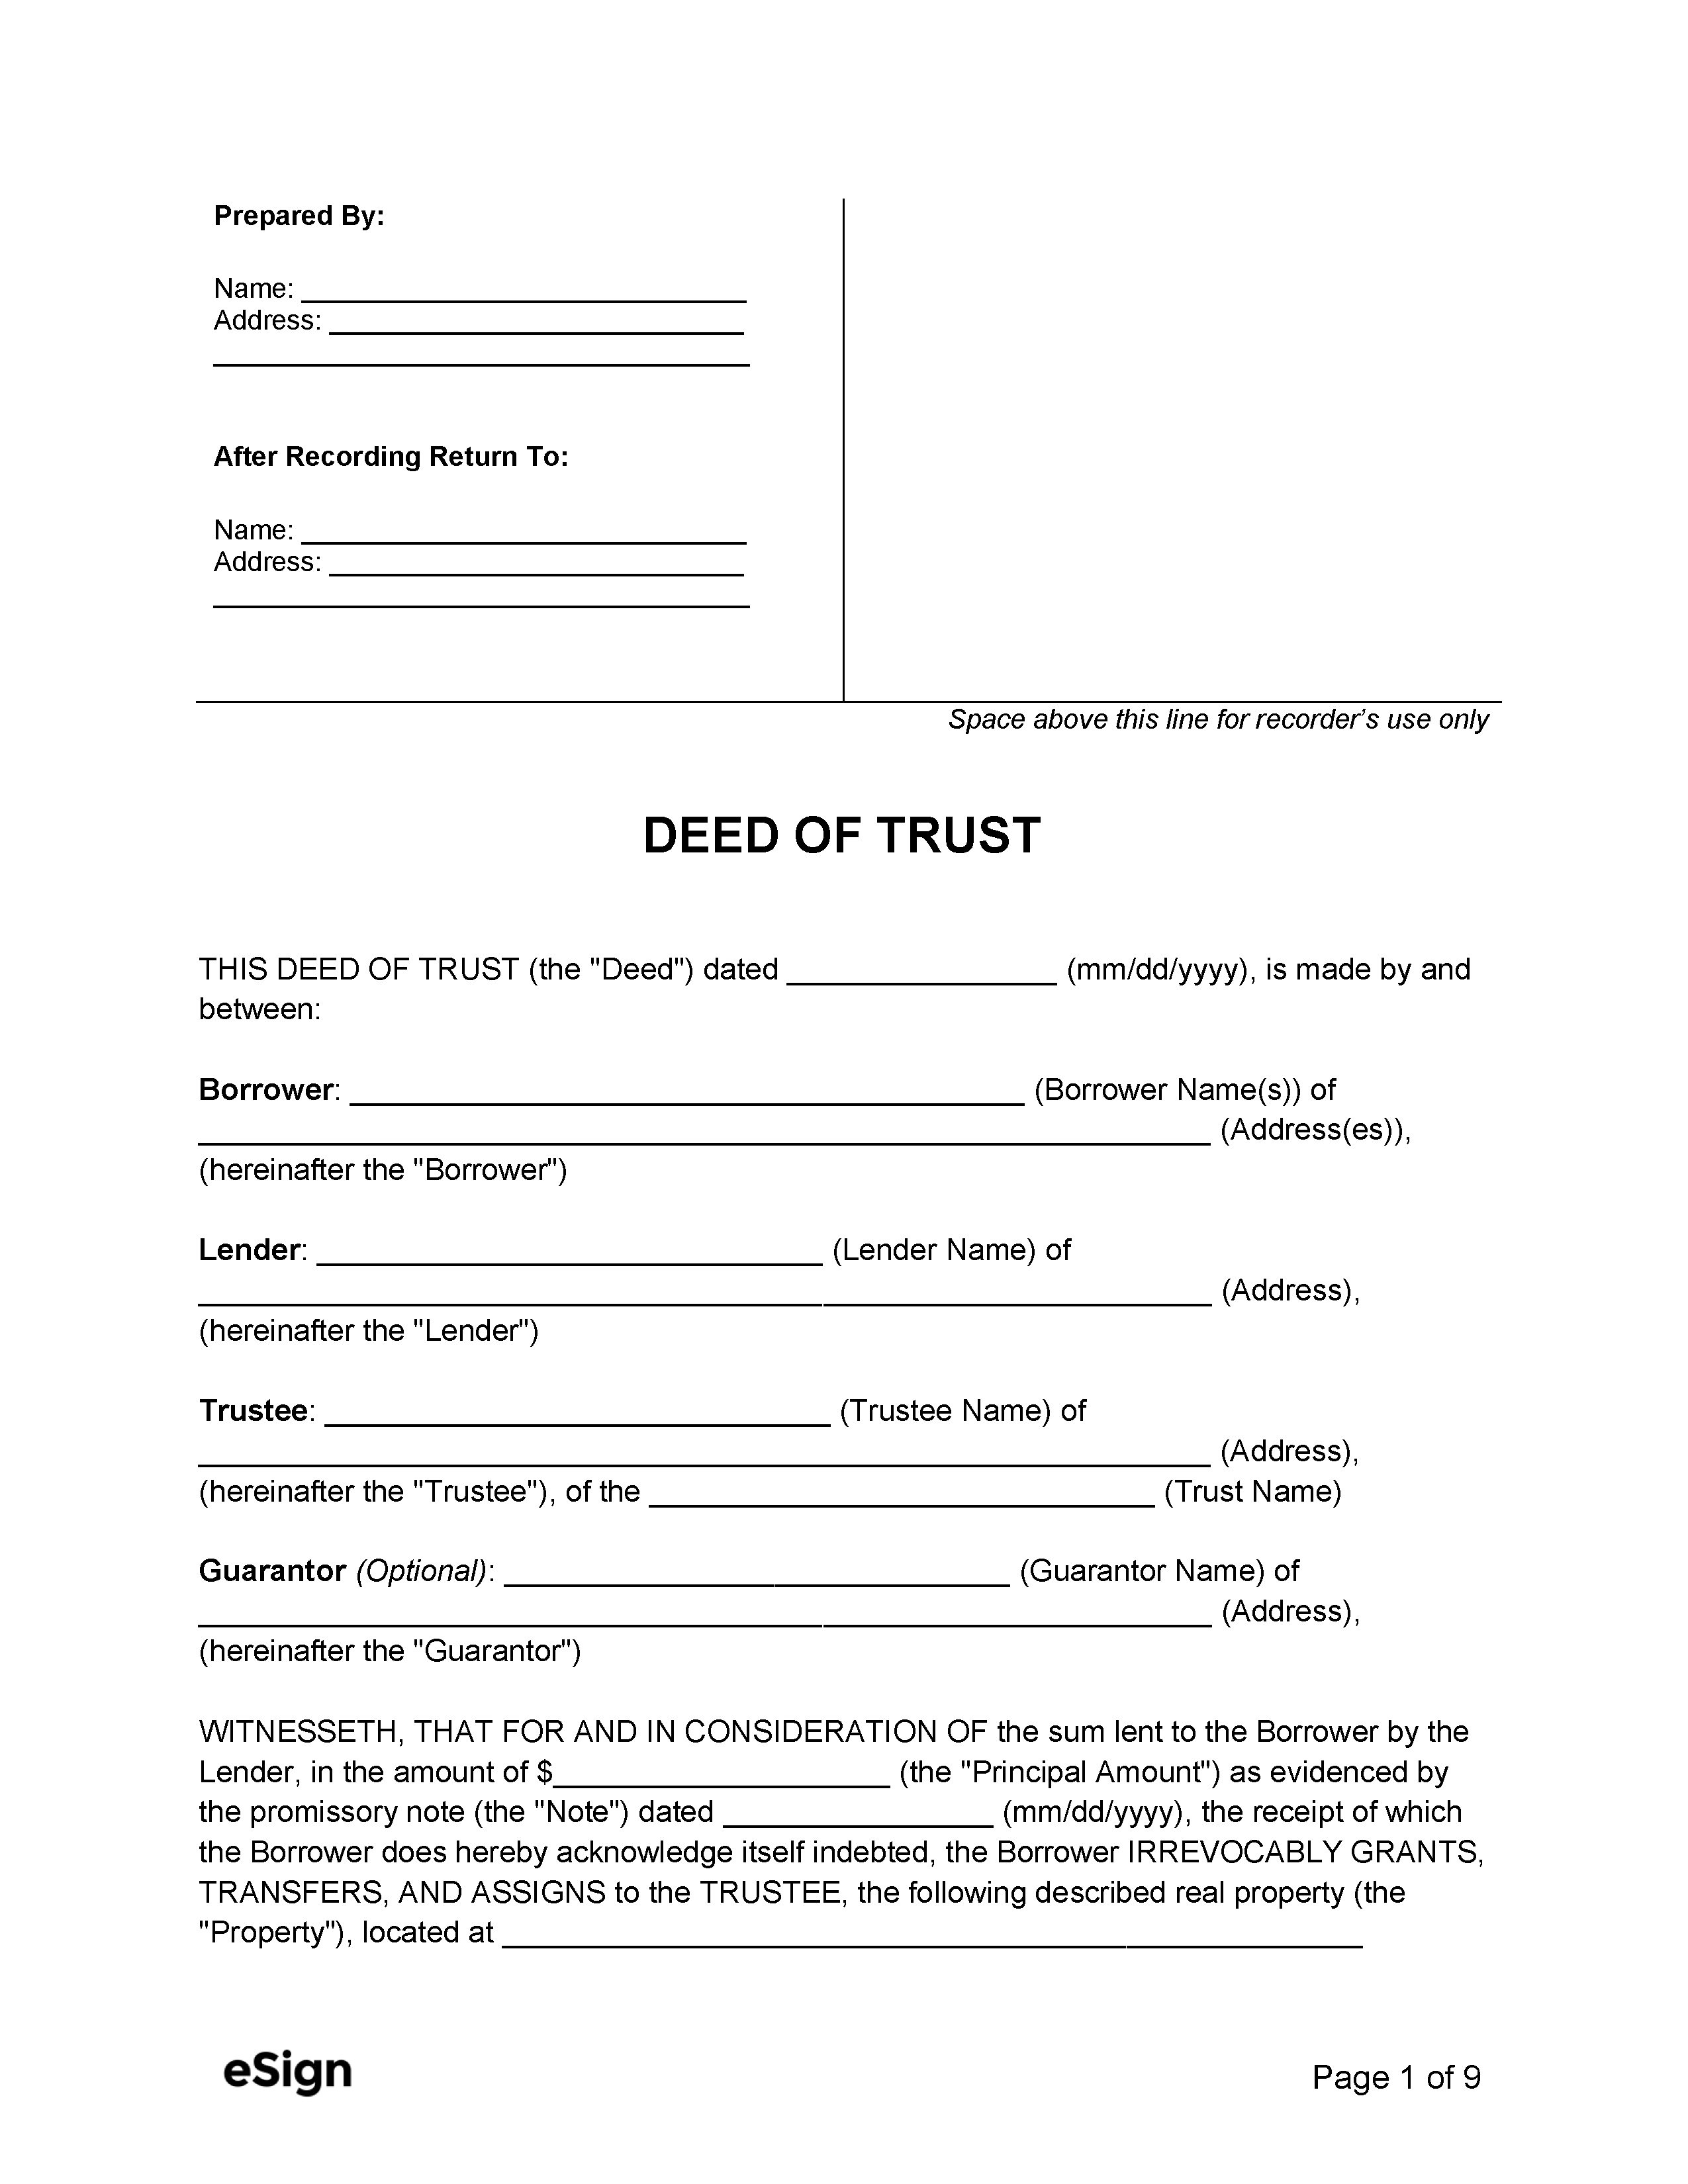 sample assignment of deed of trust